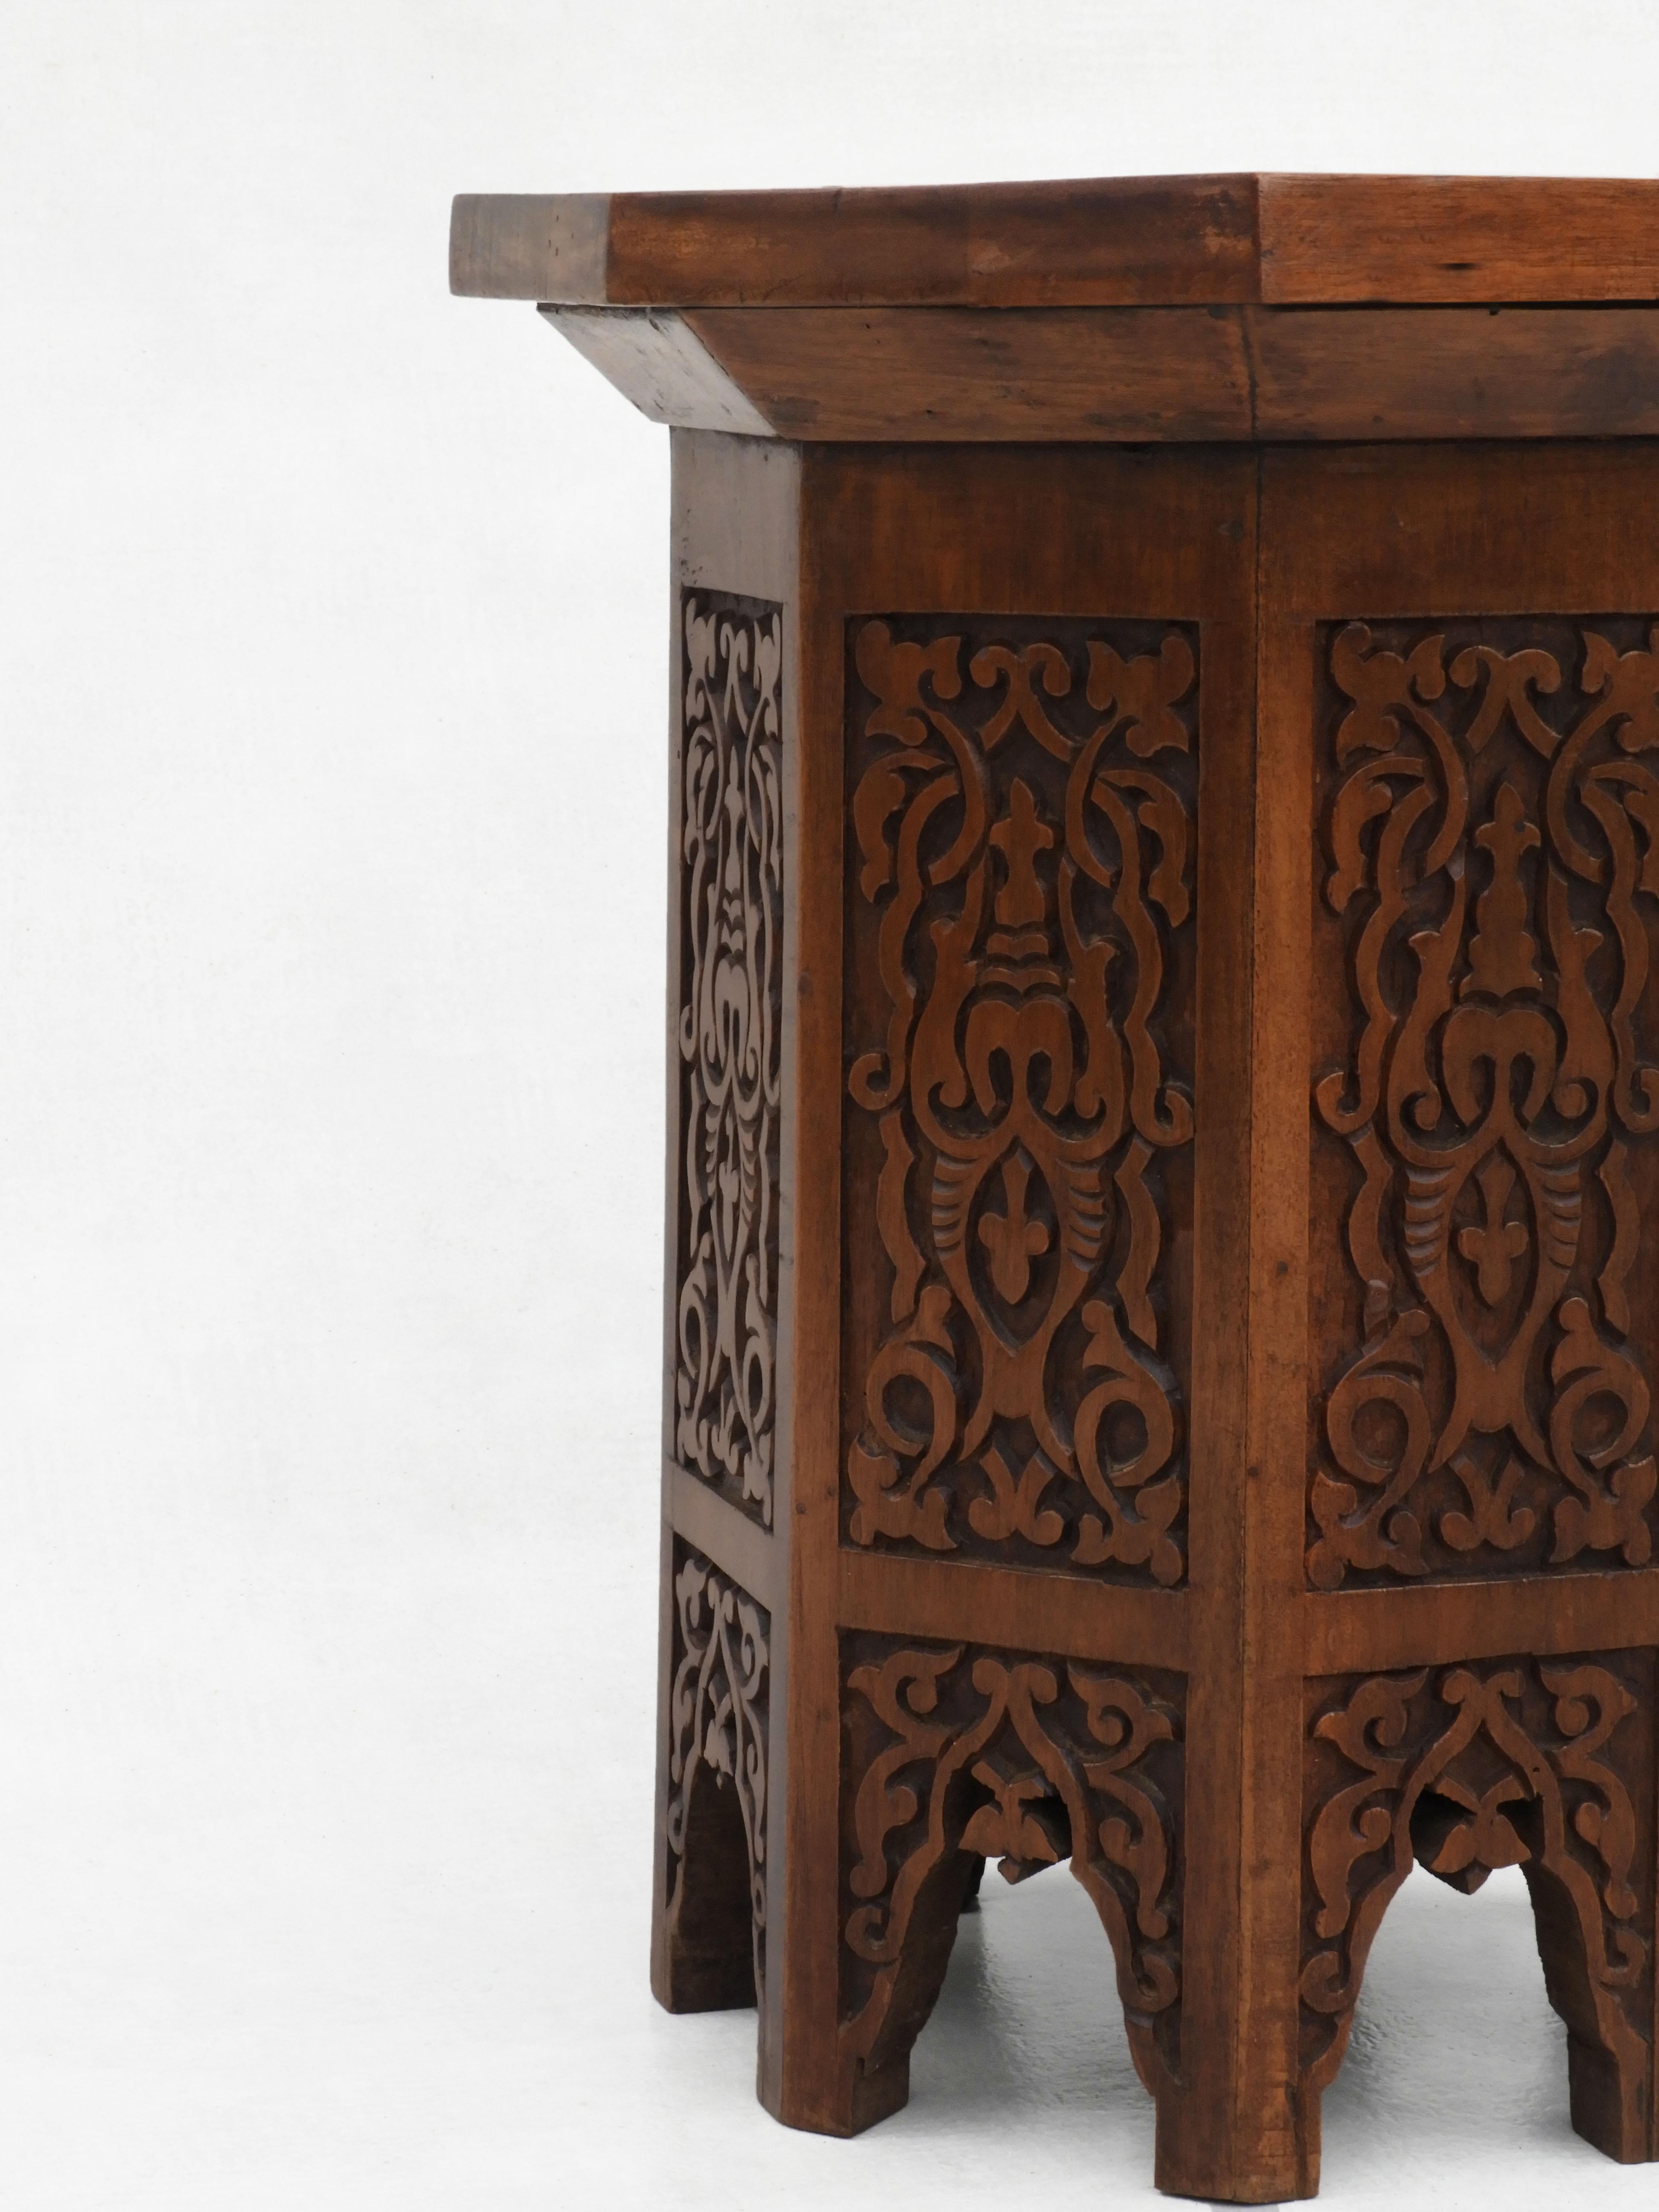 Moroccan Hand Carved Side Table or Tabouret Stool  1